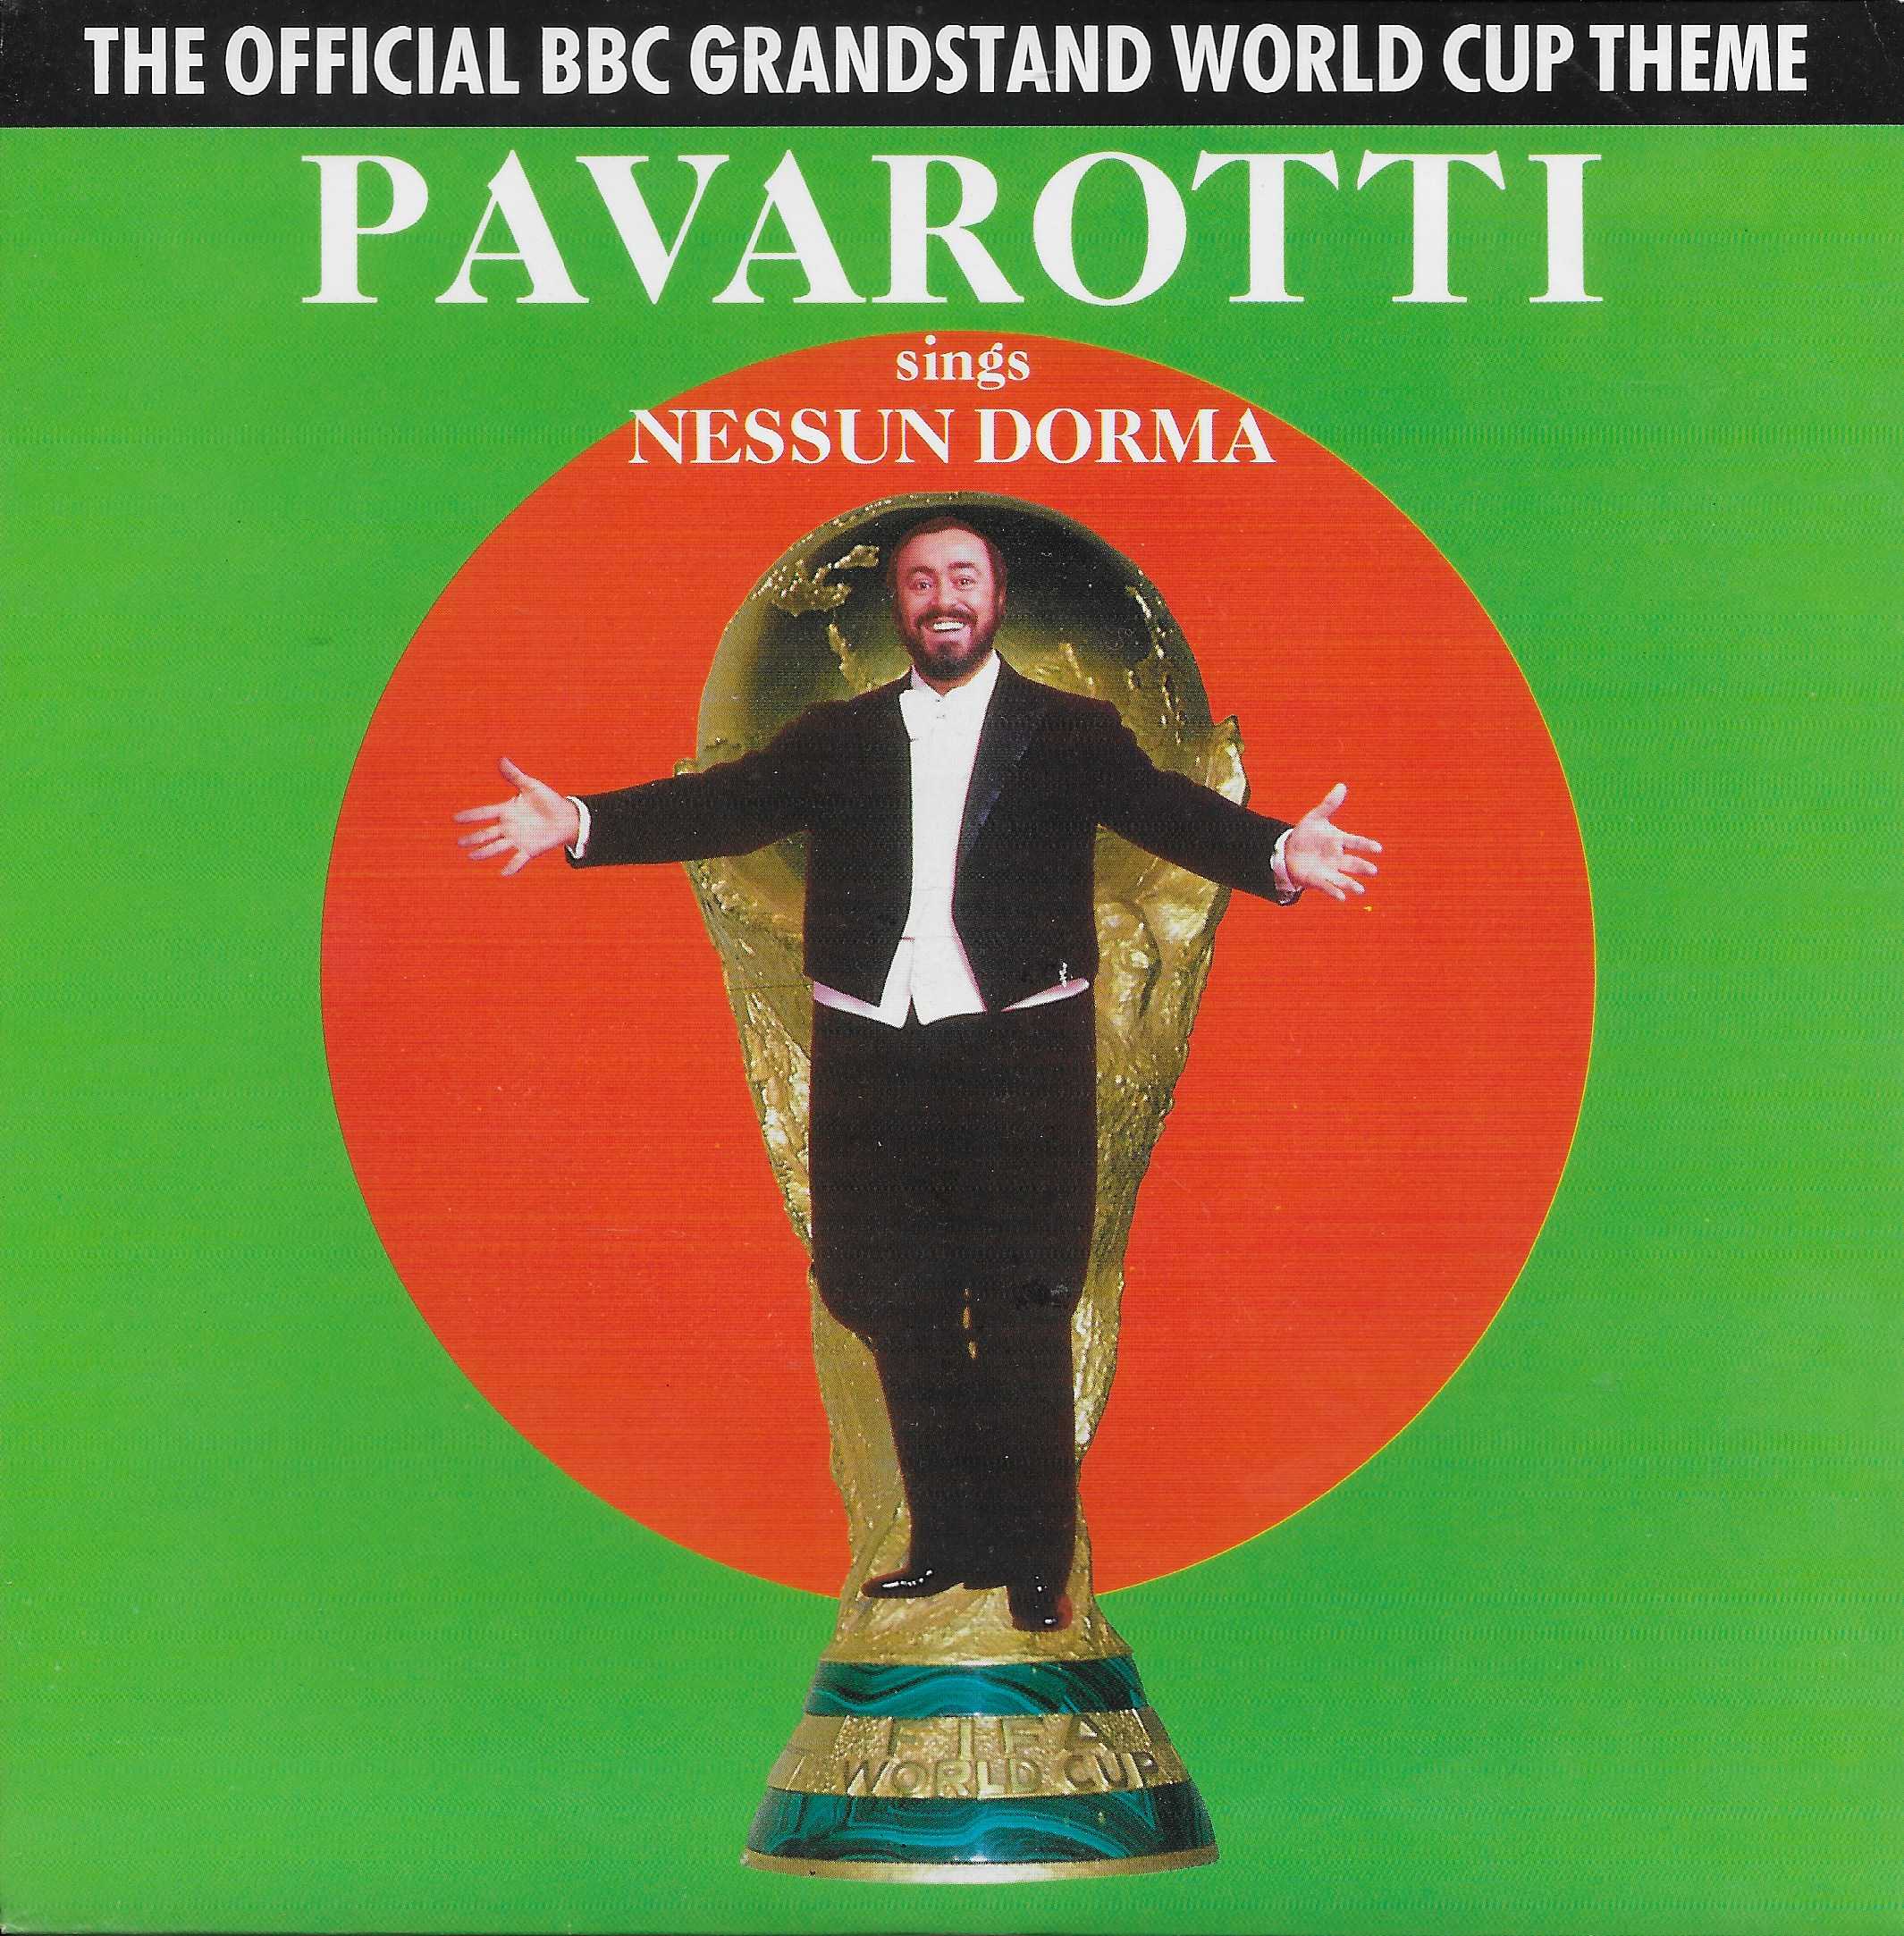 Picture of Nessun dorma (World Cup Grandstand (1990)) by artist Puccini / Teschemacher / Di Capua / Pavarotti from the BBC singles - Records and Tapes library